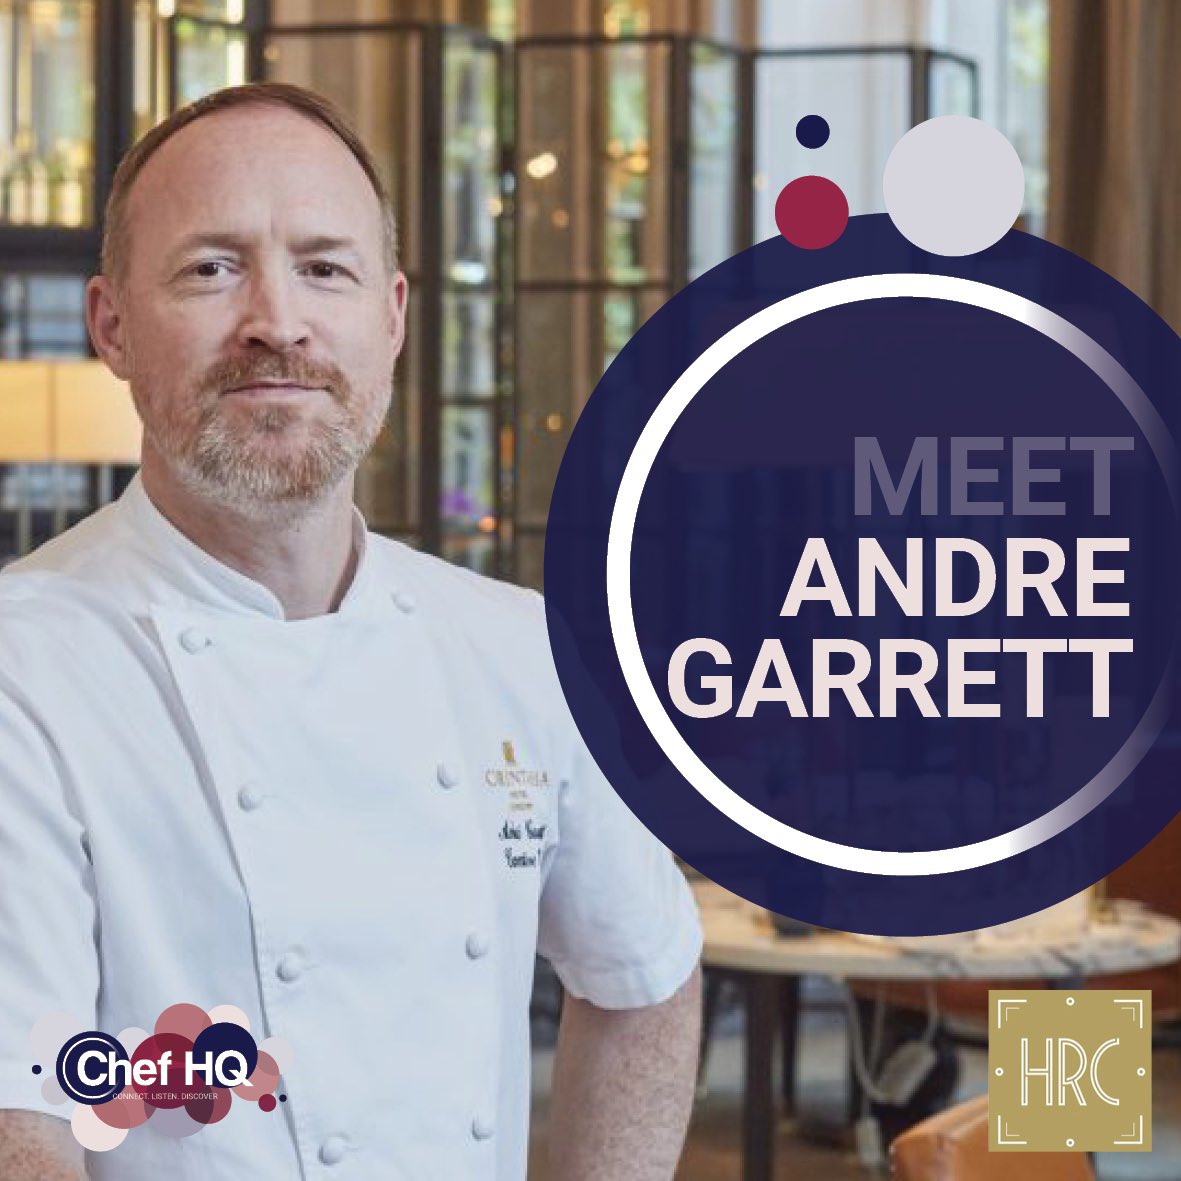 Spencer and Andre will both be on stage discussing the Roux Scholarship and how winning changed their lives. Monday 2pm Chef HQ @HRC_Event @RouxScholarship @Metzger1993